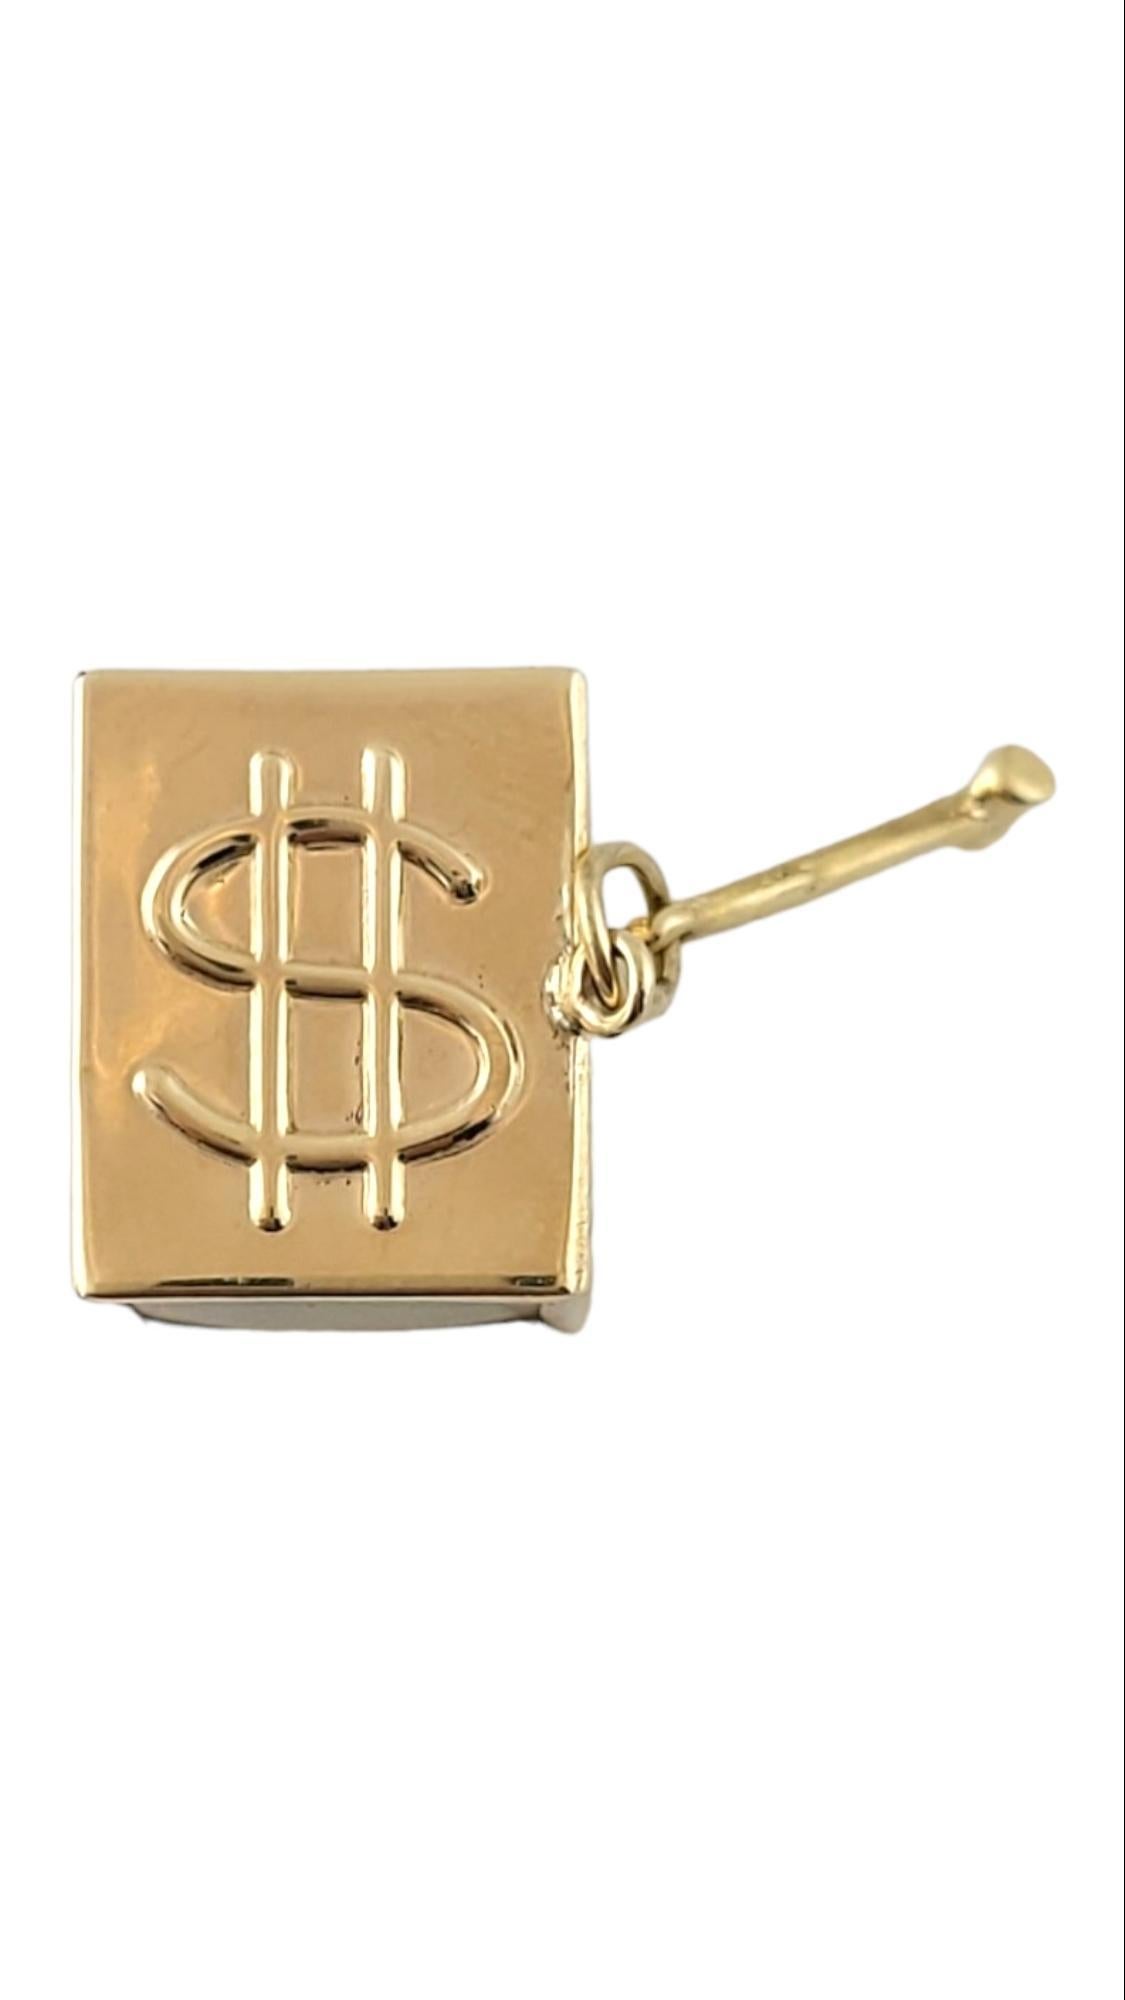  14K Yellow Gold Mad Money Box Charm

This beautiful mad money box charm is crafted from 14K yellow gold!

Size: 16.2mm X 13.2mm X 13.2mm

Weight: 3.64 g/ 2.3 dwt

Hallmark: 14K

Very good condition, professionally polished.

Will come packaged in a